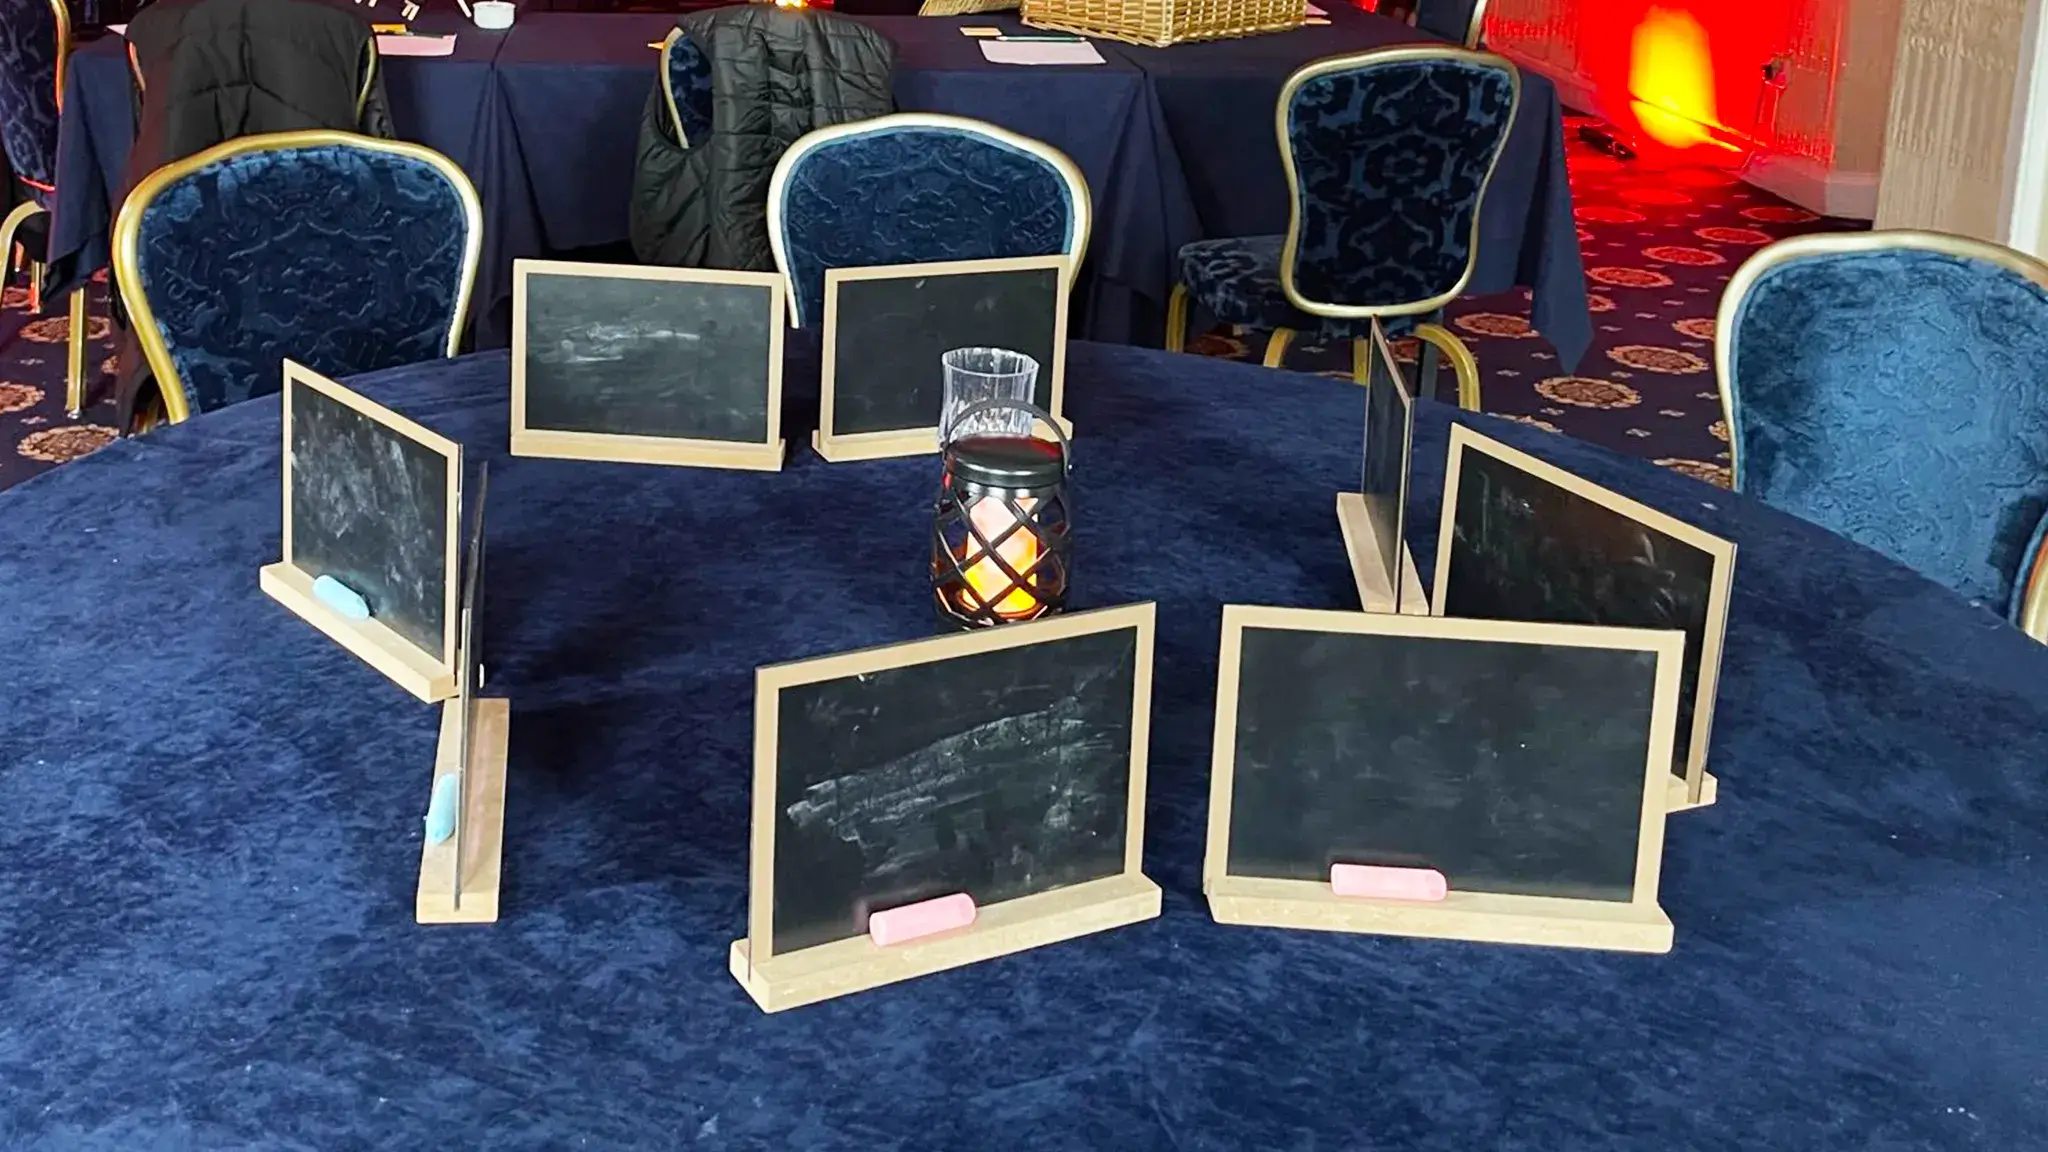 Betrayers team building tablets on table for riddles